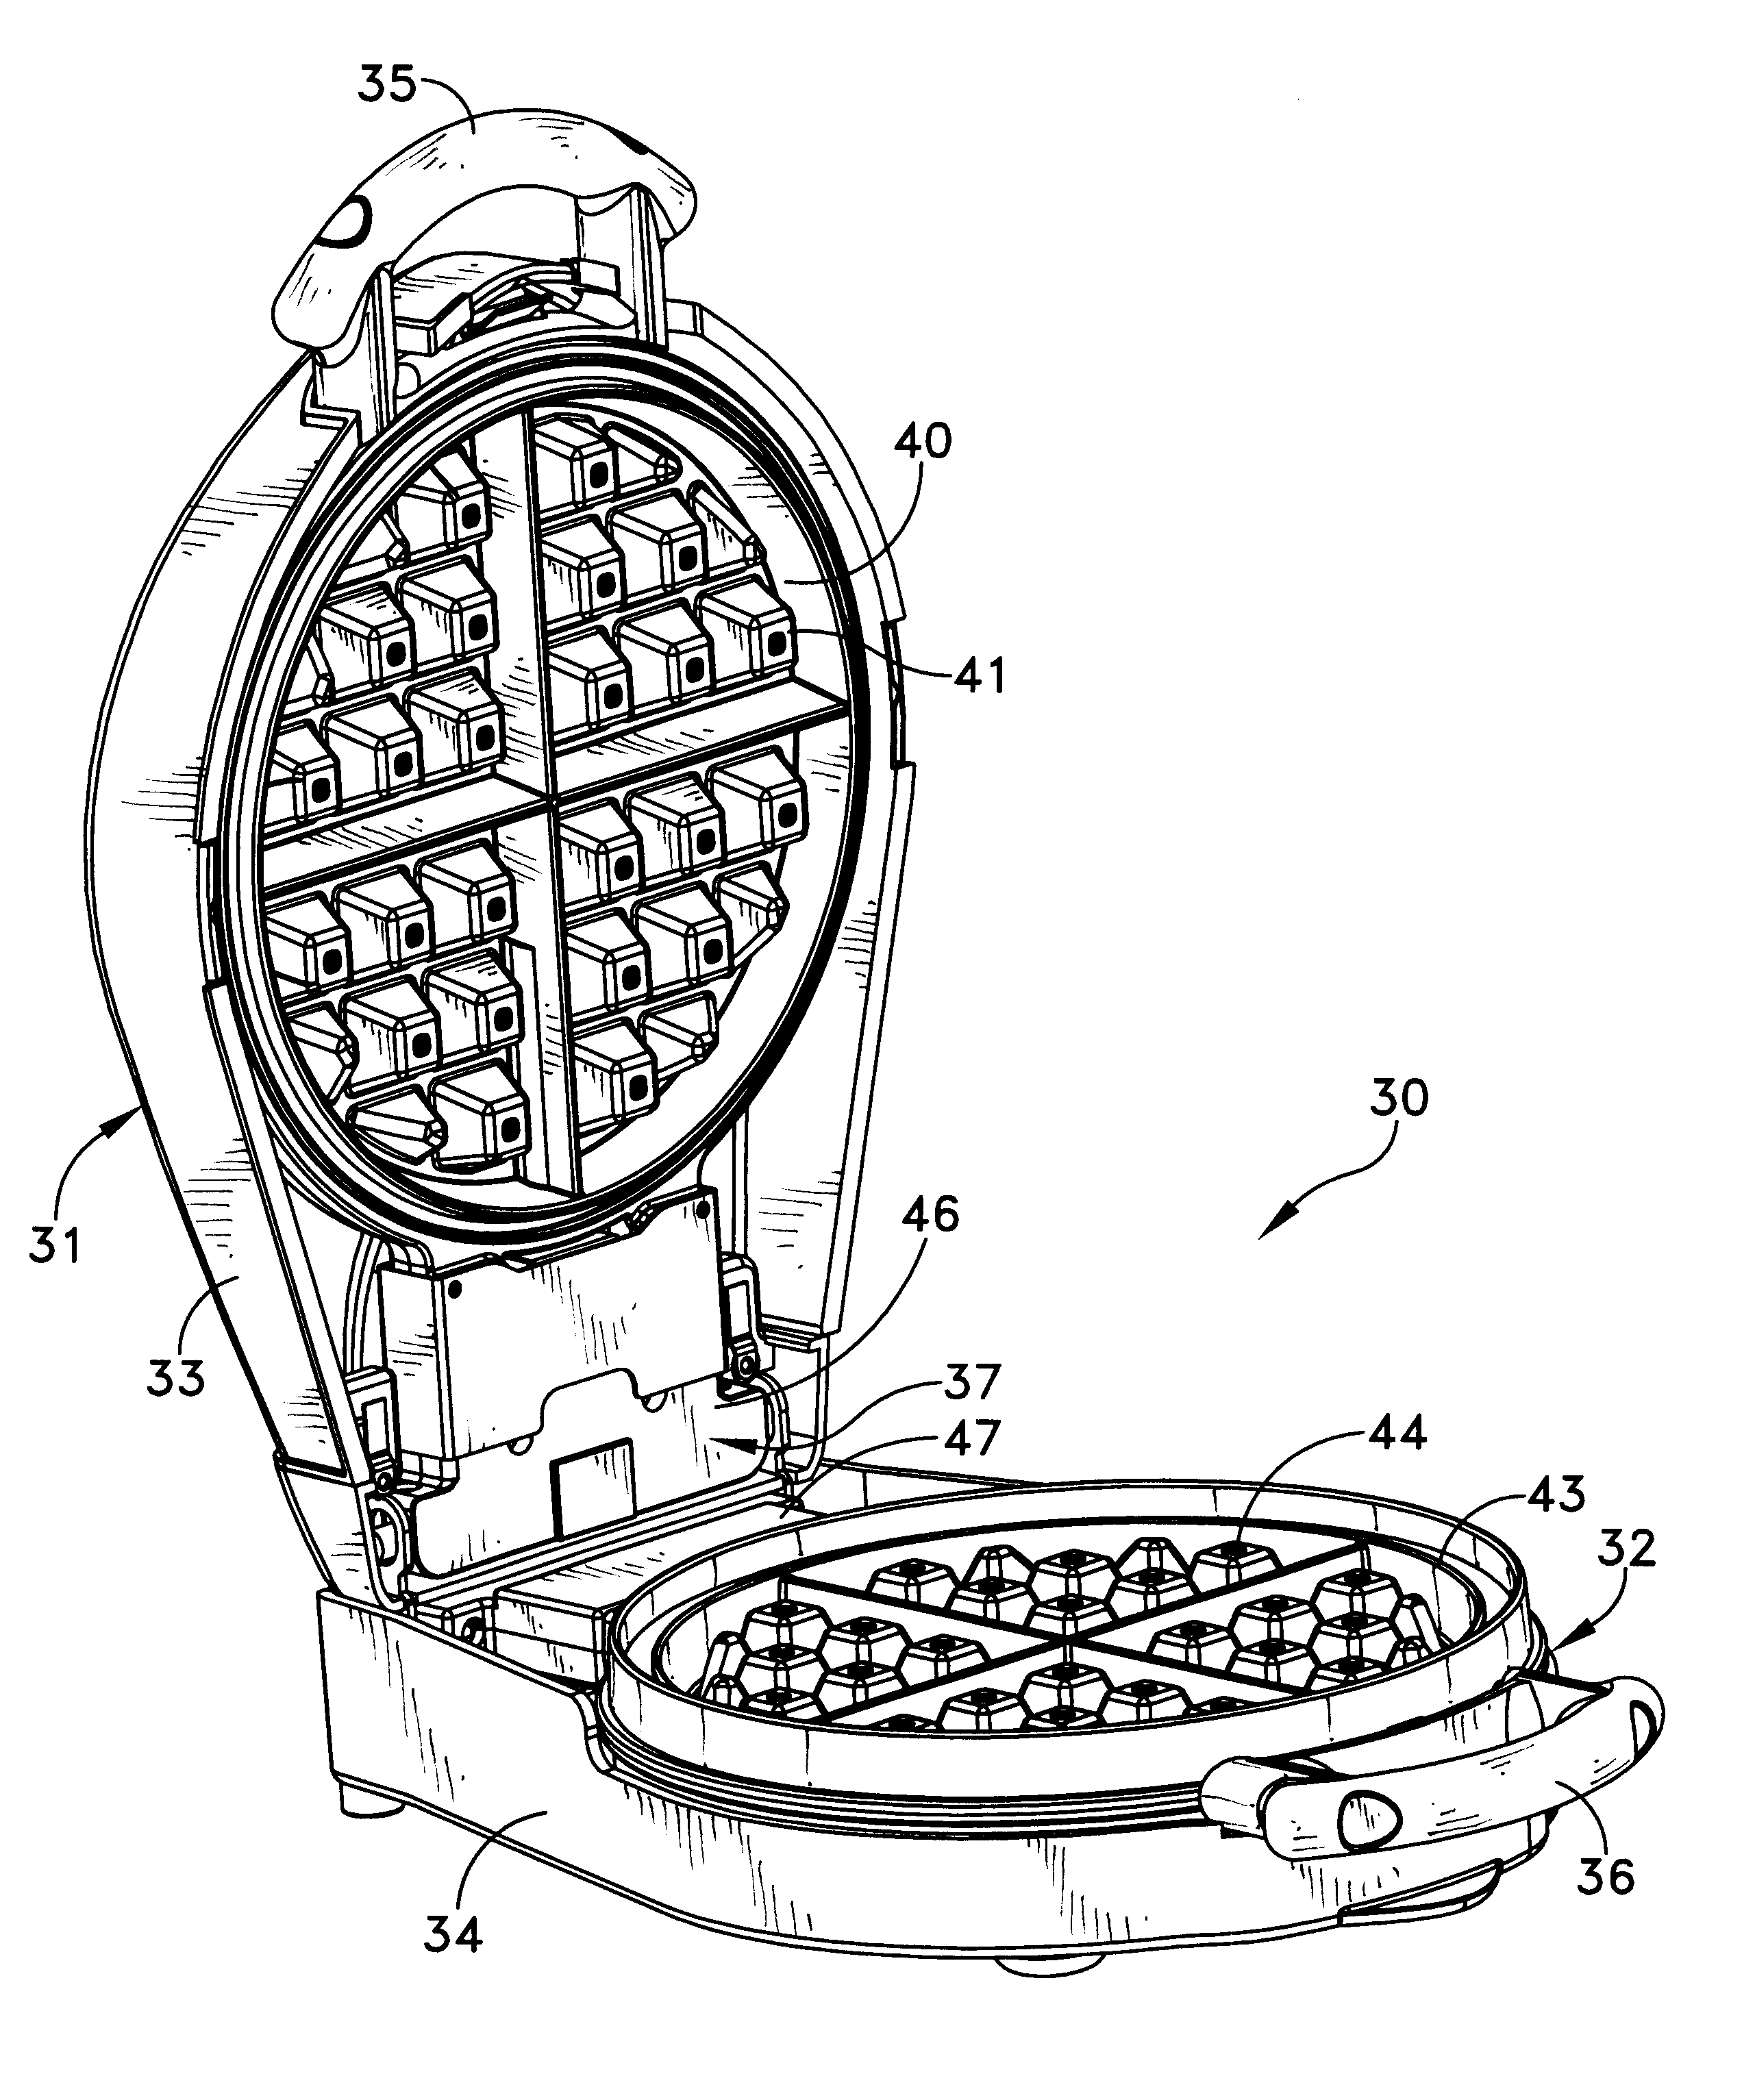 Electric cooking appliance with reversible cooking elements